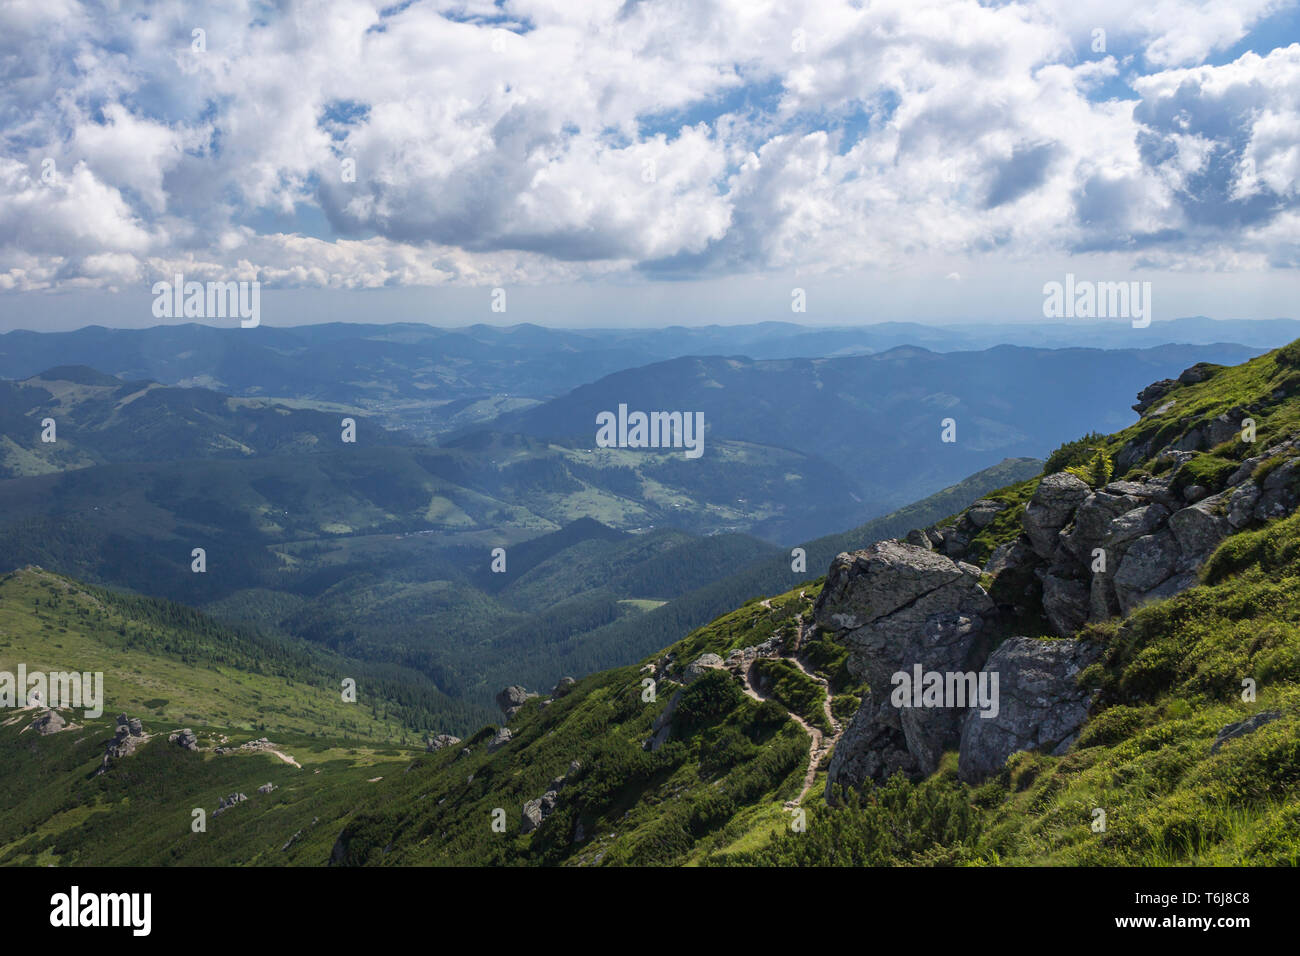 Scenic summer or spring mountain view with cloudy sky. Ukraine, Carpathians, Dzembronia High mountains in vivid color. Nobody. Beautiful mountain lanscape or valley. Stock Photo